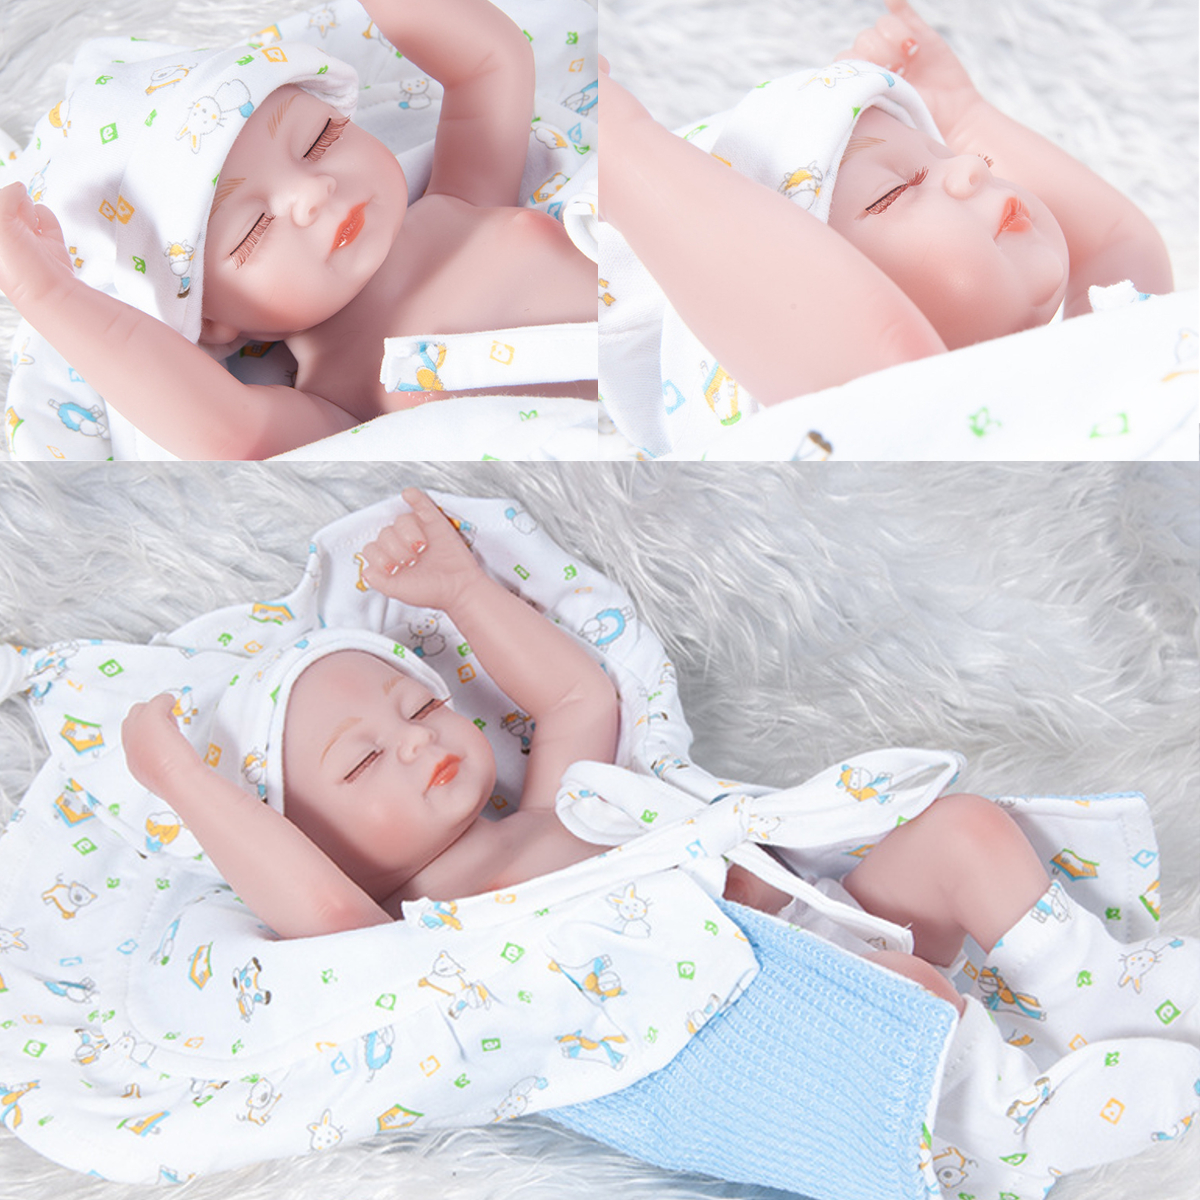 28CM-Soft-Silicone-Vinyl-Realistic-Sleeping-Reborn-Lifelike-Newborn-Baby-Doll-Toy-with-Moveable-Head-1731373-8